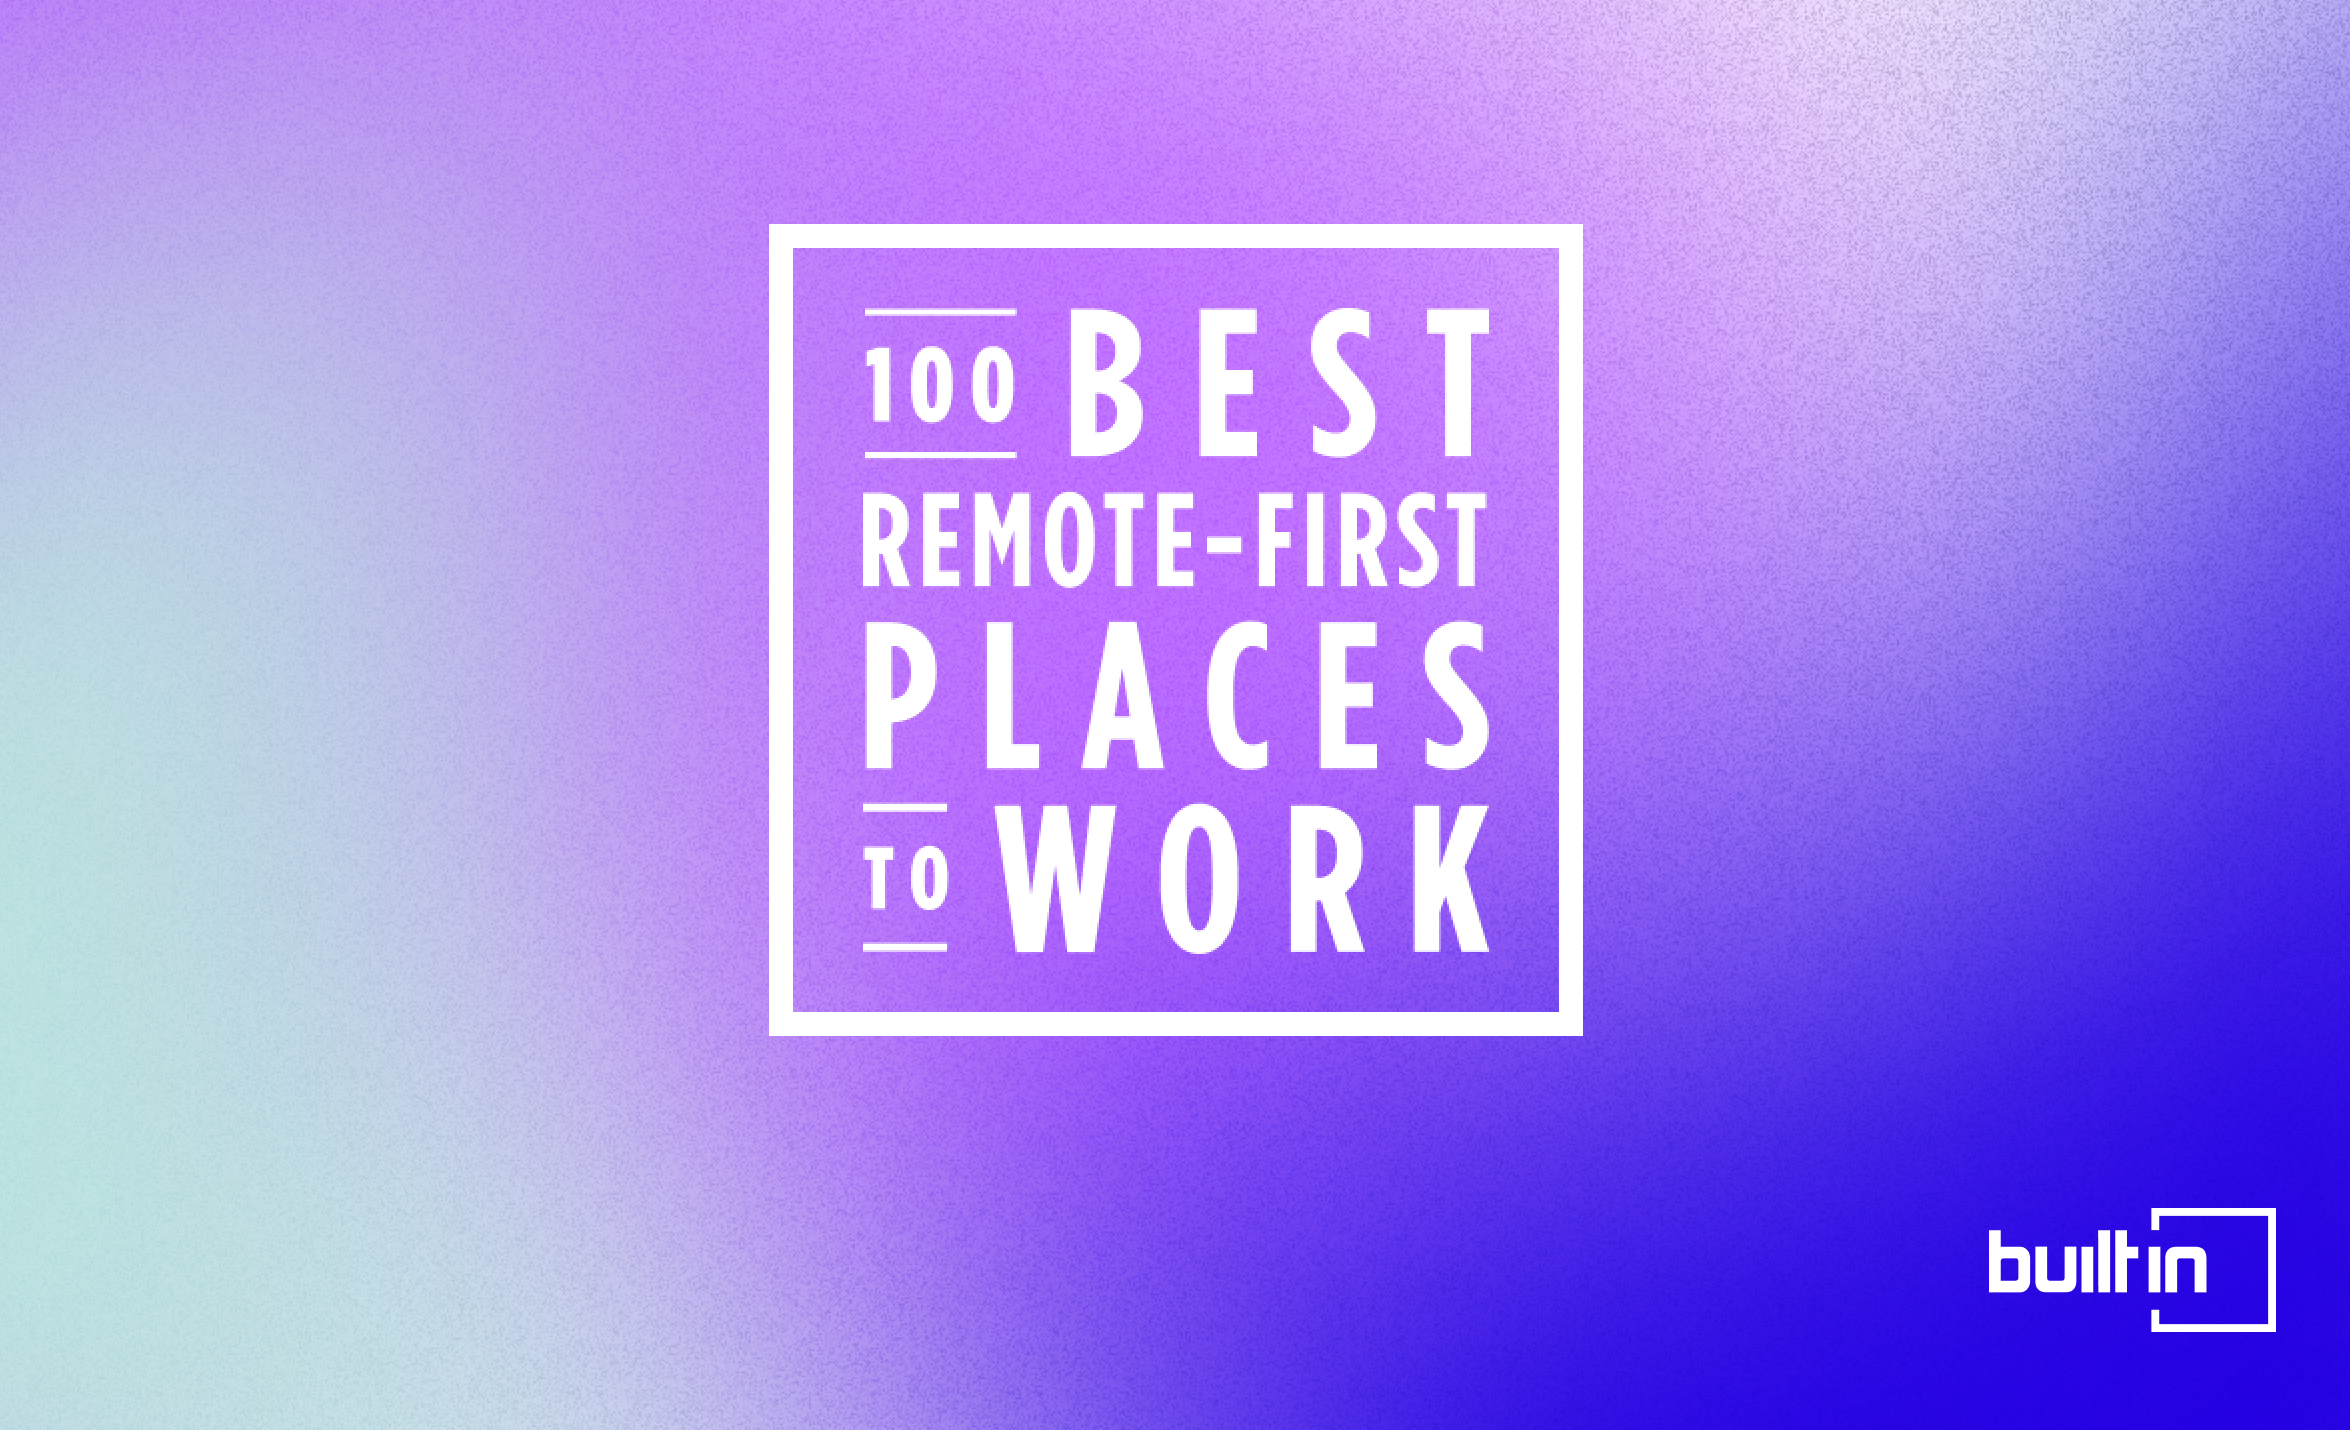 Built In's 100 Best Remote-First Places to Work logo